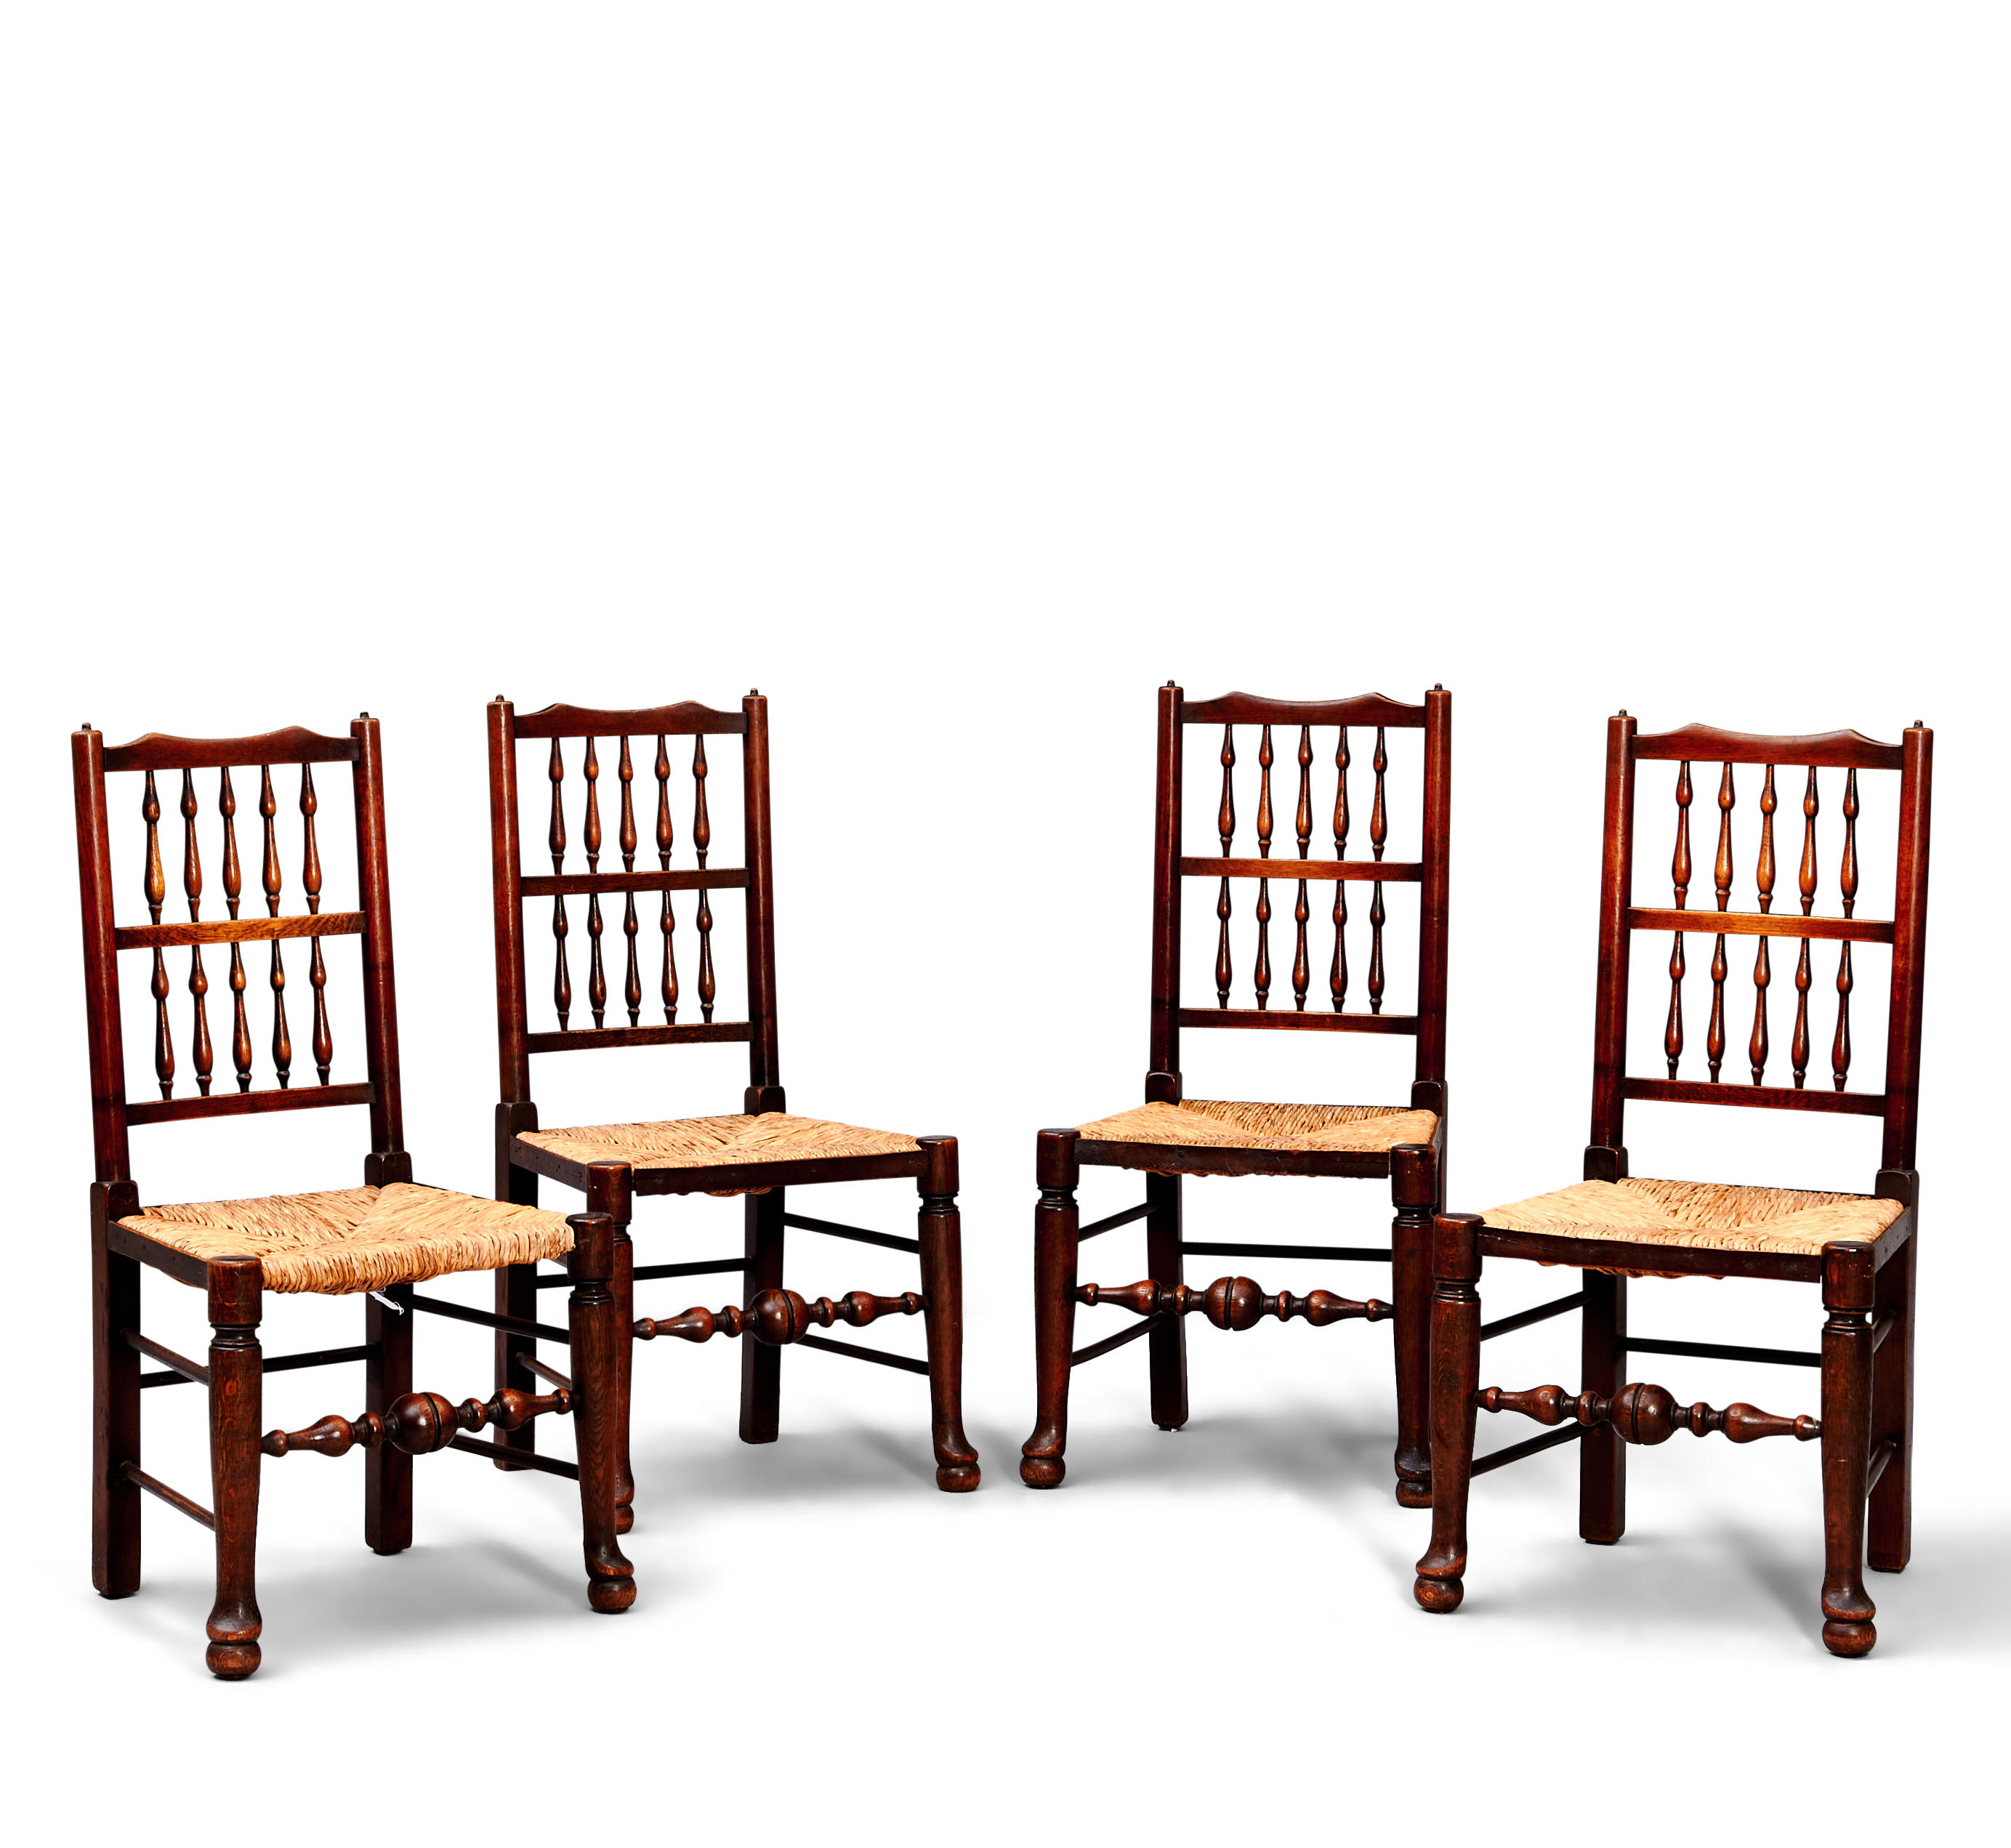 FOUR OAK SPINDLE-BACK SIDE CHAIRS,